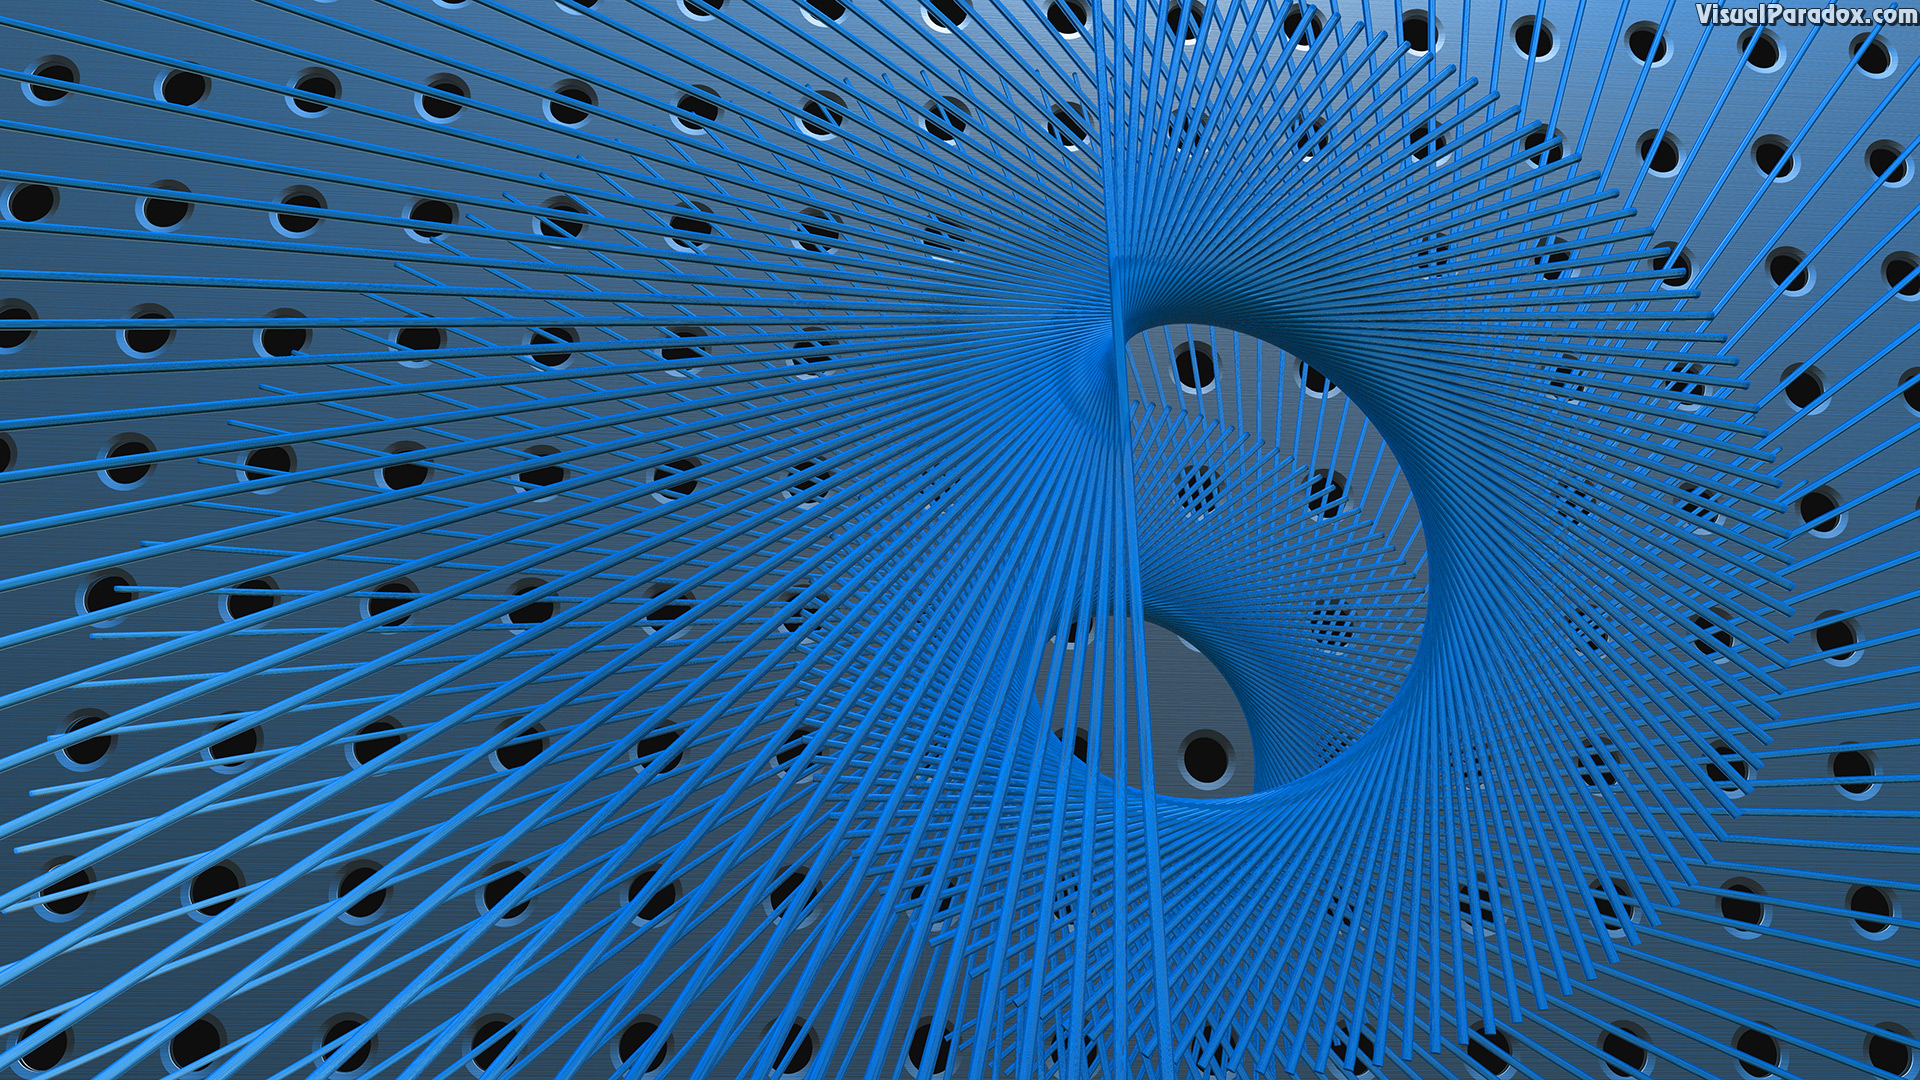 vortex, whirlpool, twist, spin, recursive, medal, plate, grill, grid, stereo, speaker, holes, abstract, 3d, wallpaper